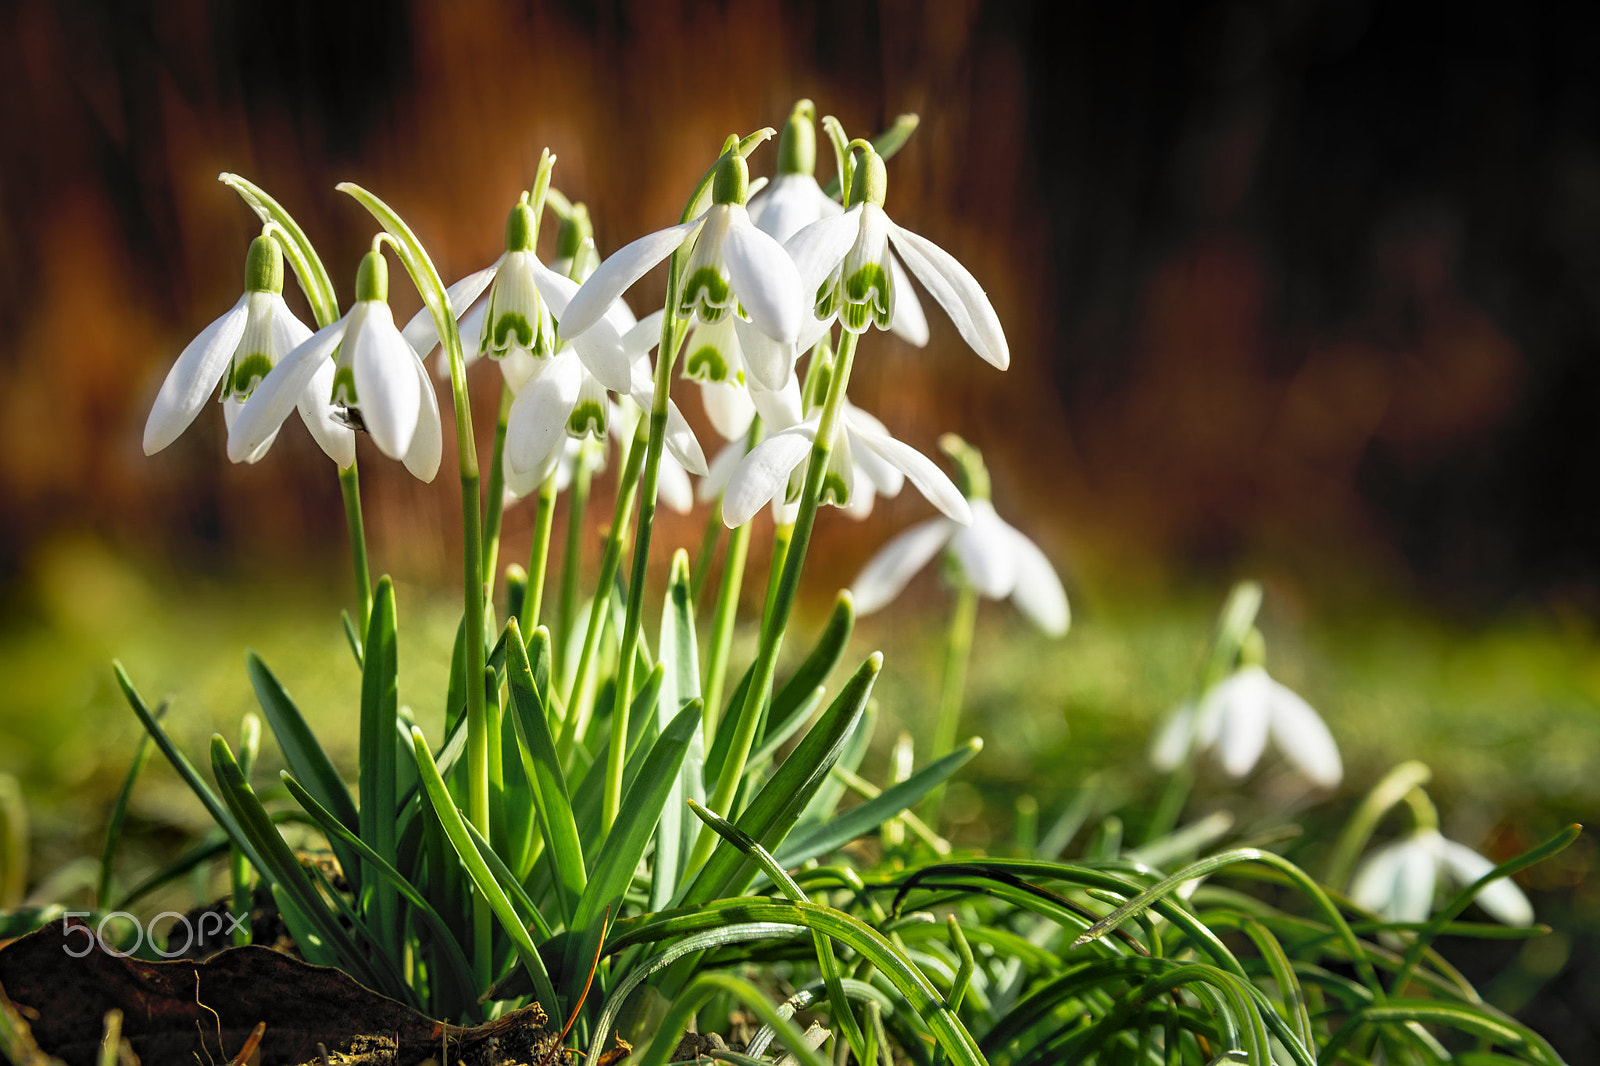 Nikon D750 sample photo. Group of snowdrops in spring photography